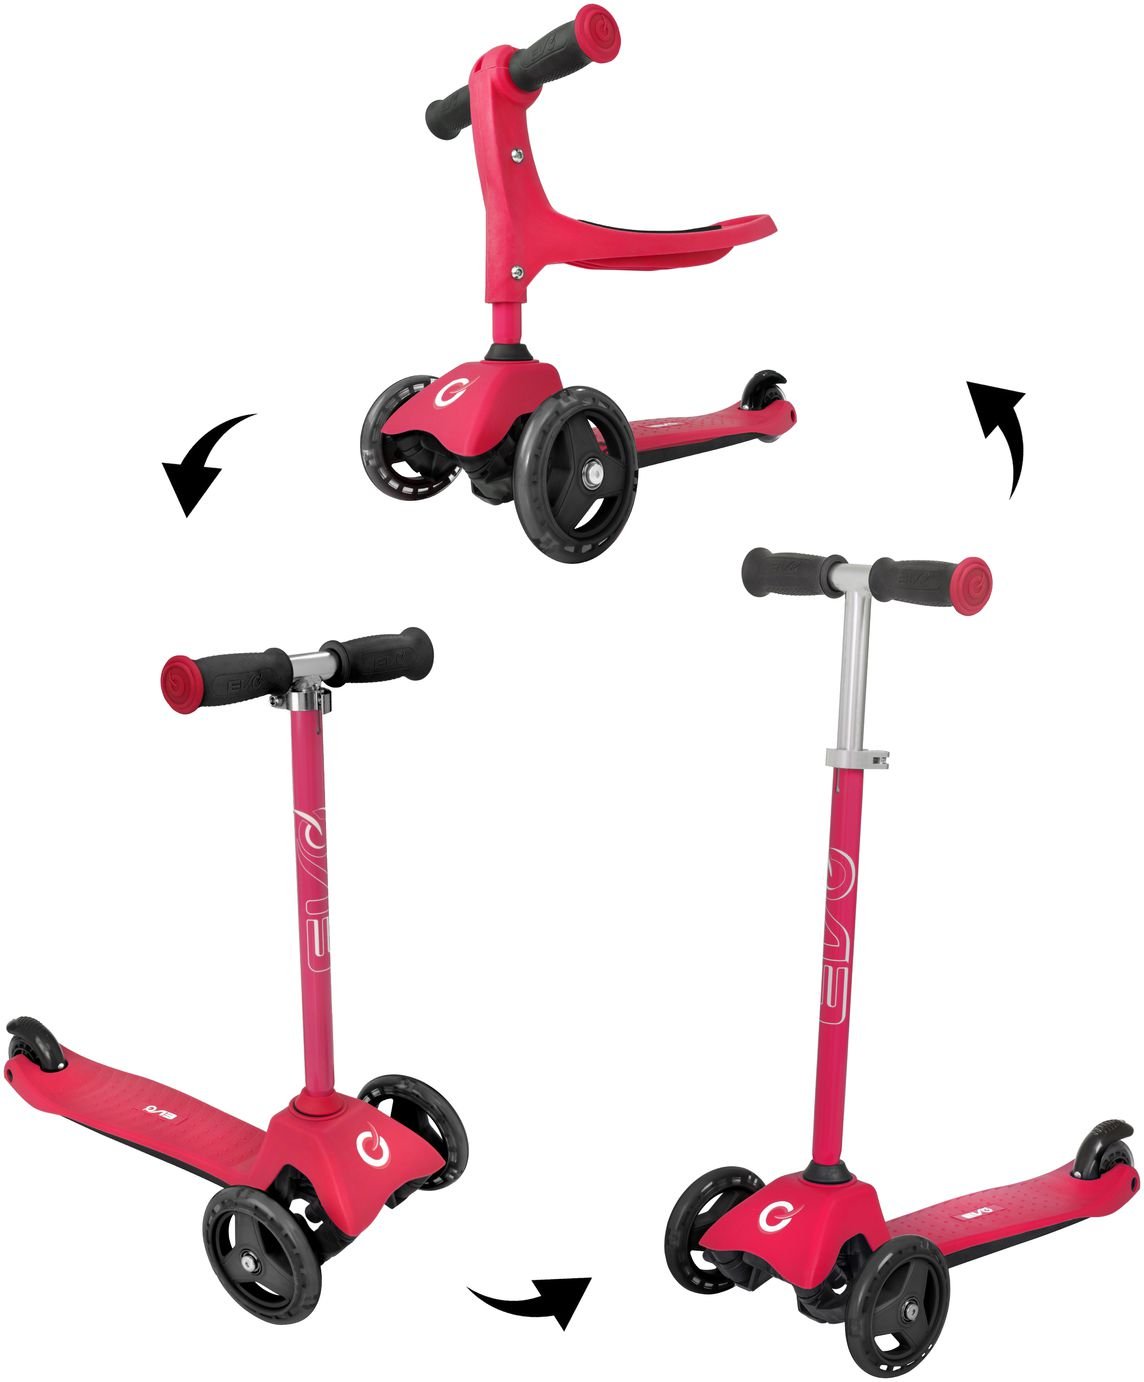 Evo 3 in 1 Cruiser Tri Scooter and Ride On  - Red 